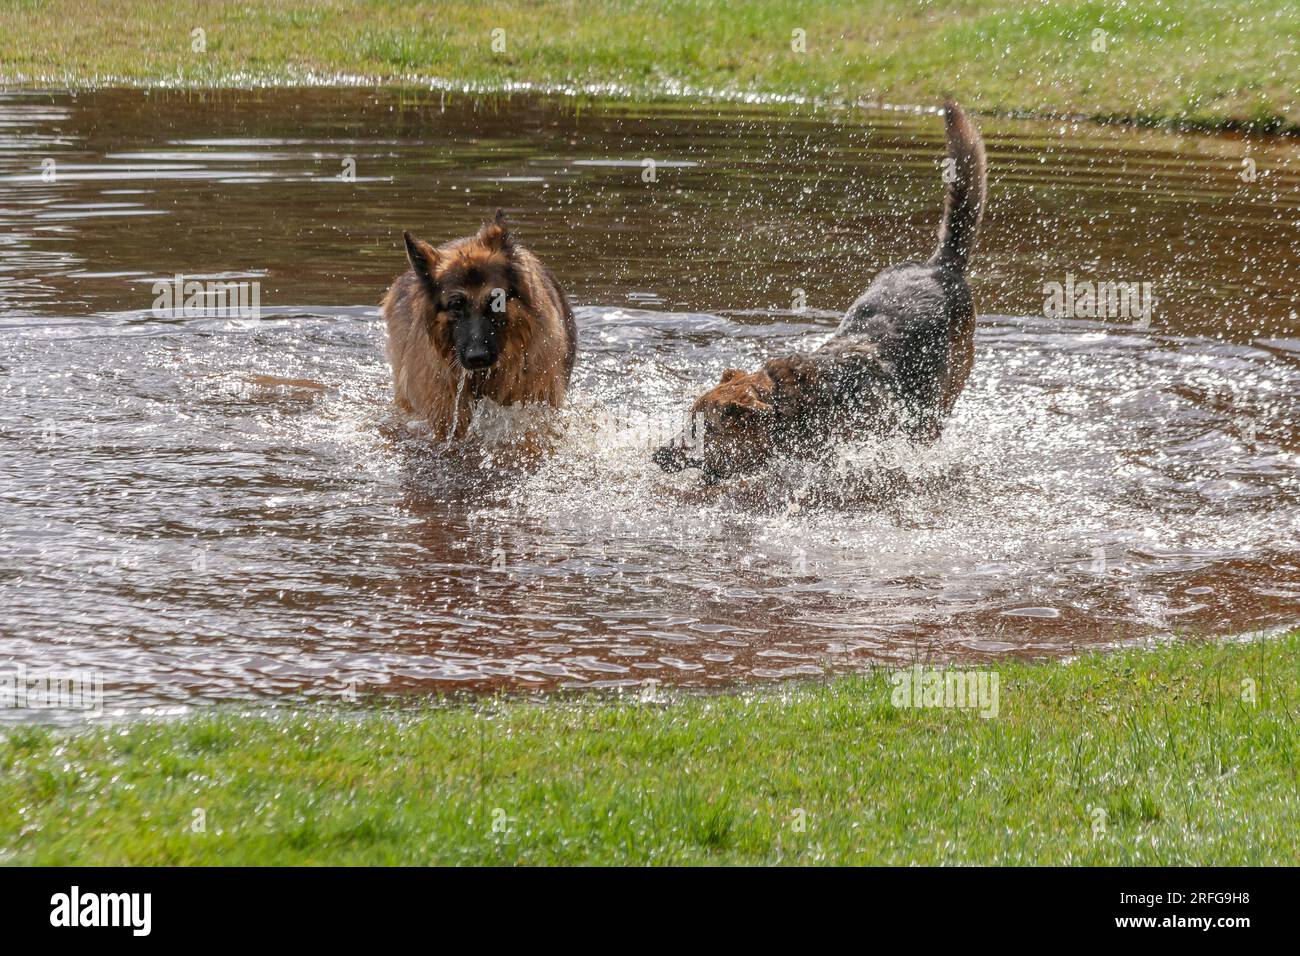 Two dogs (a German Shepherd and a cross breed) play in a pool of water. Stock Photo